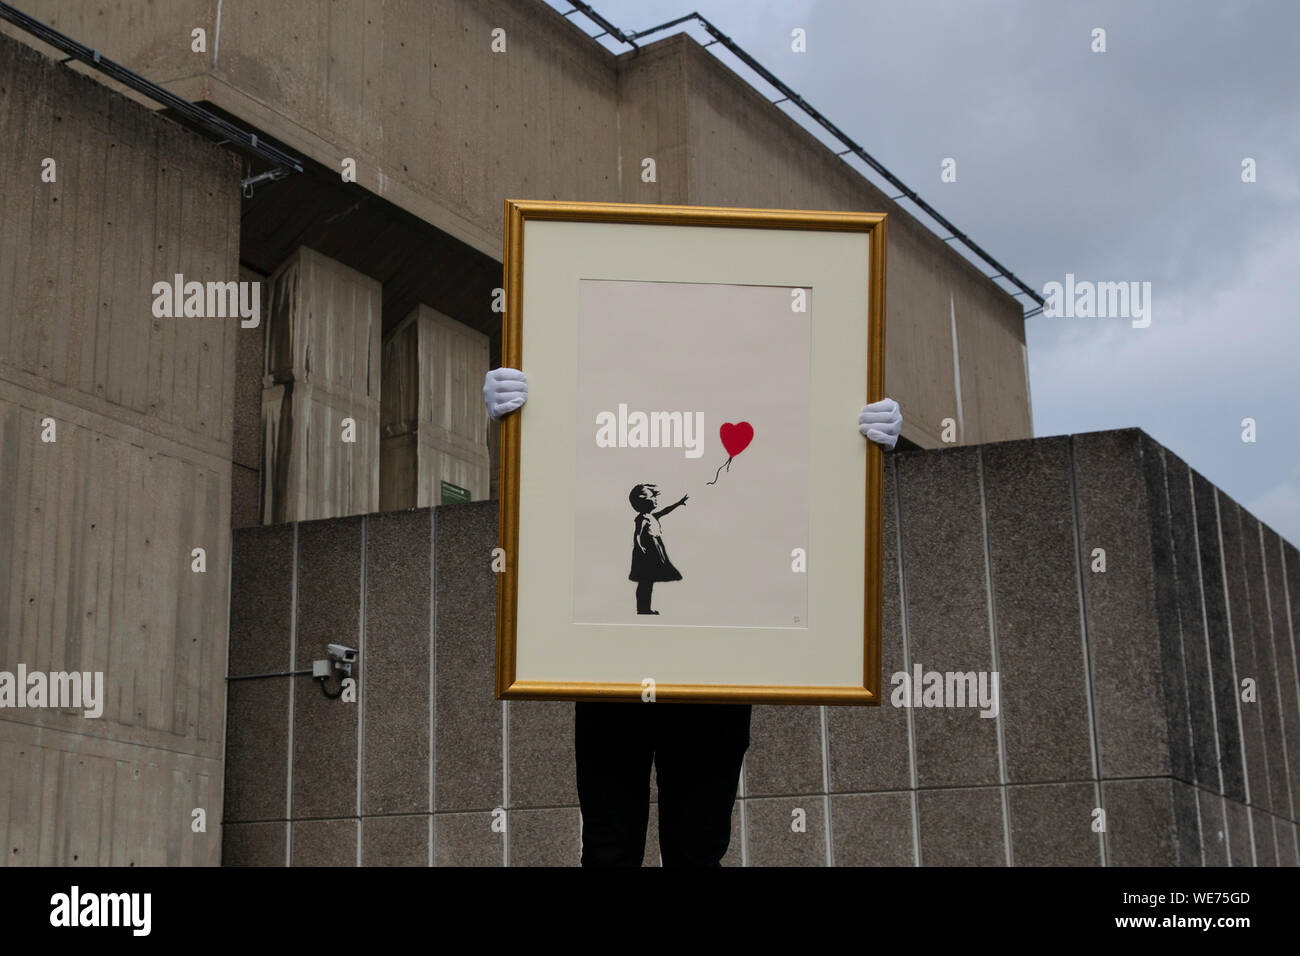 London, UK. 30th Aug, 2019. A Christie's employee poses with artworks 'Girl with balloon' by anonymous street artist Banksy at the Southbank Centre in London Friday, August 30, 2019. The Southbank Centre was near one of the original locations the artwork appeared in London. The screen prints will be on sale during an online only auction titled 'Banksy : I can't believe you morons buy this sh*t' presented by Christie's auction house between 11-24 September 2019. Photograph Credit: Luke MacGregor/Alamy Live News Stock Photo